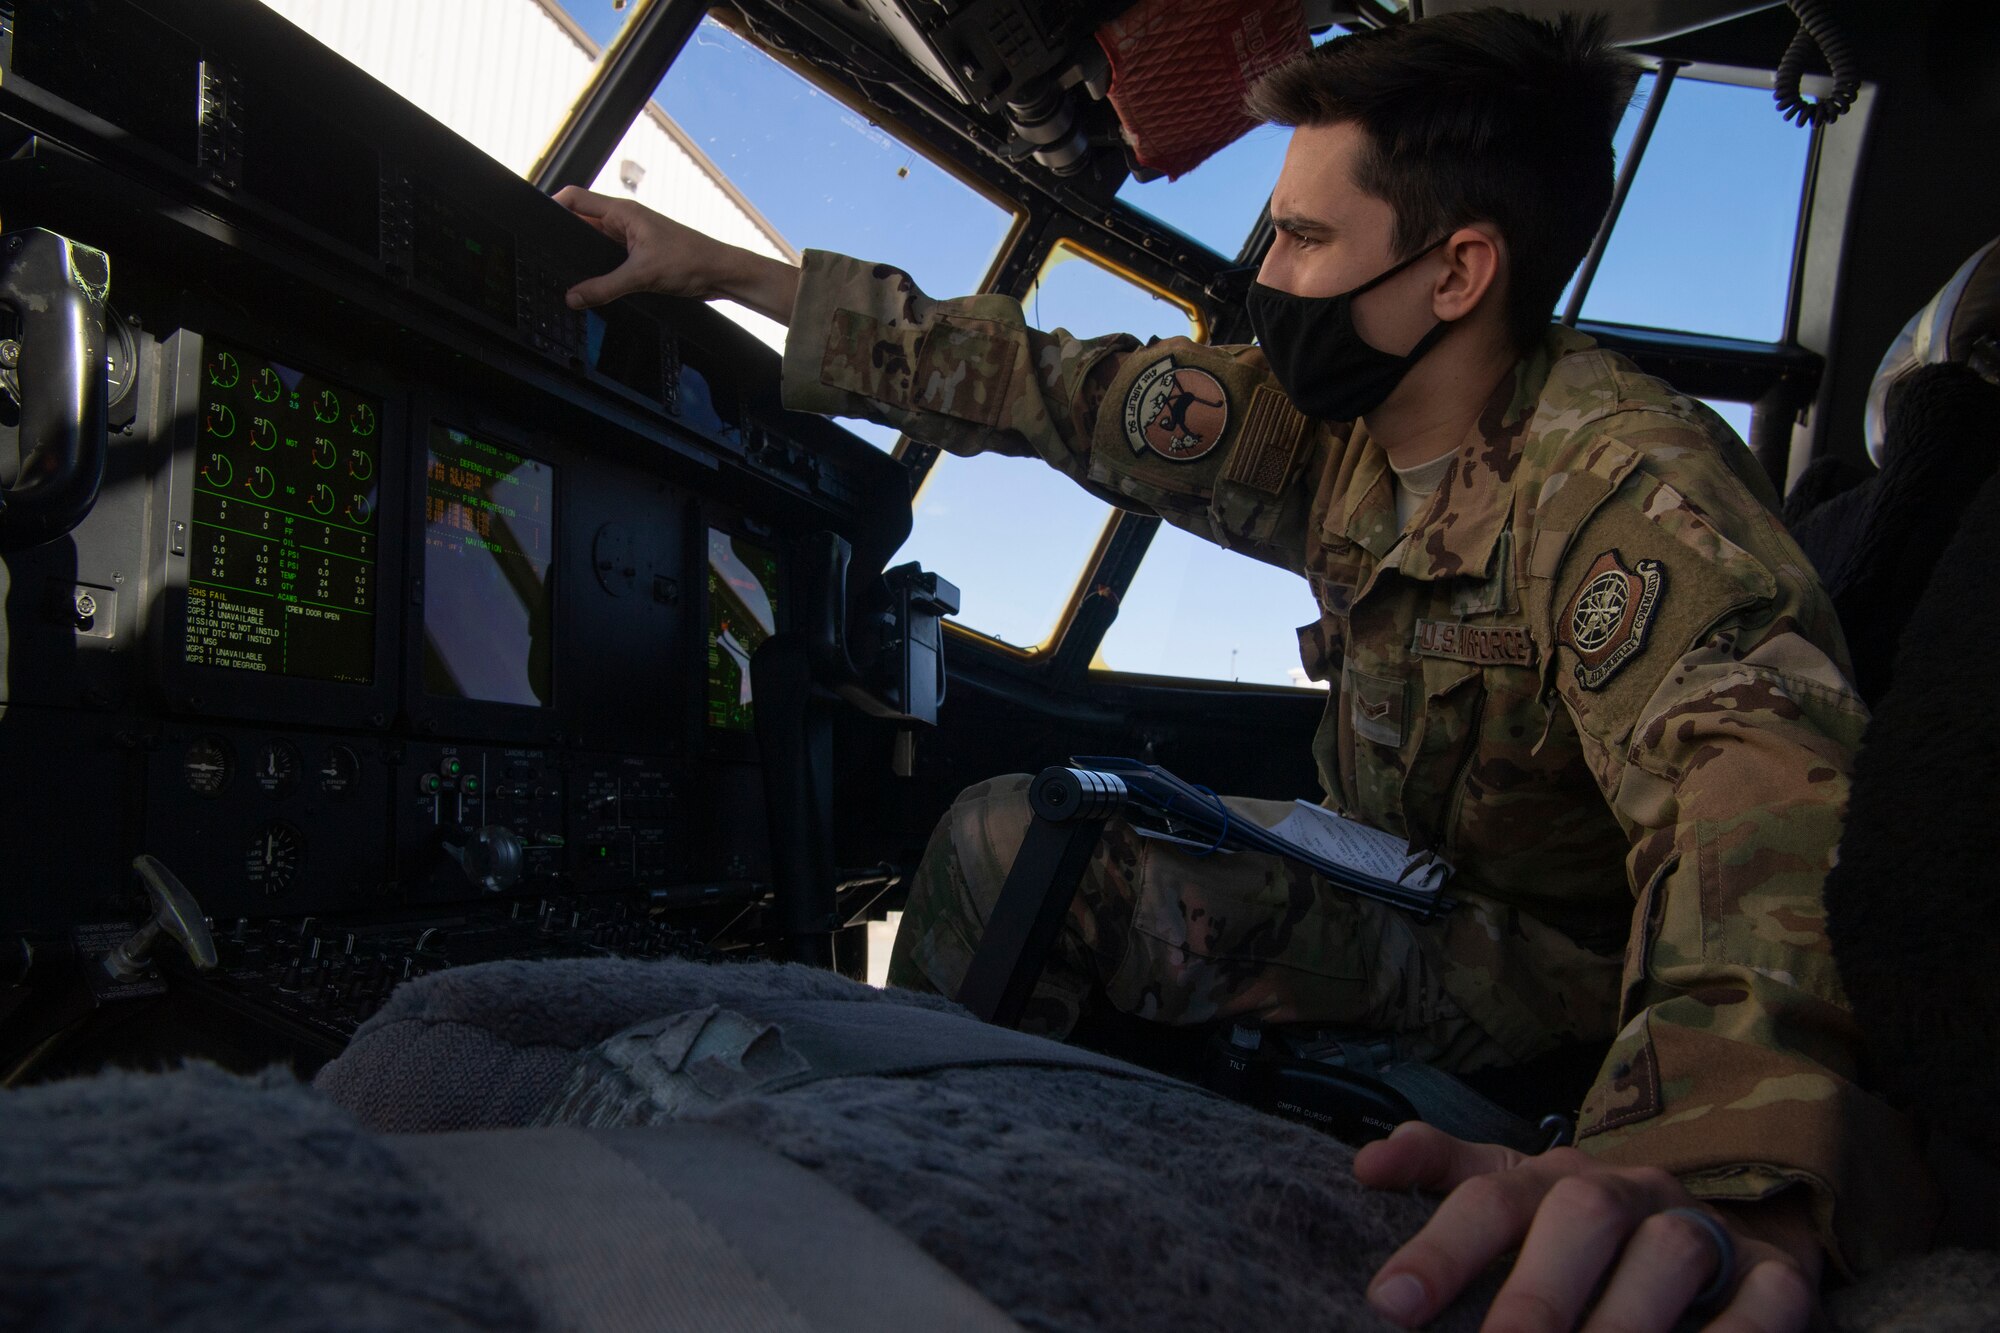 Airman 1st Class Cameron Bou, 41st Airlift Squadron loadmaster, prepares a C-130J Super Hercules for flight during pre-deployment training at Montrose Regional Airport, Colorado, July 27, 2020. This training was part of the 4/12 deployment initiative, which was developed in 2019 between airlift squadrons from Dyess Air Force Base, Texas and Little Rock AFB, allowing each squadron a full year of dwell time followed by a four-month rotation to their respective area of responsibility. (U.S. Air Force photo by Airman 1st Class Aaron Irvin)